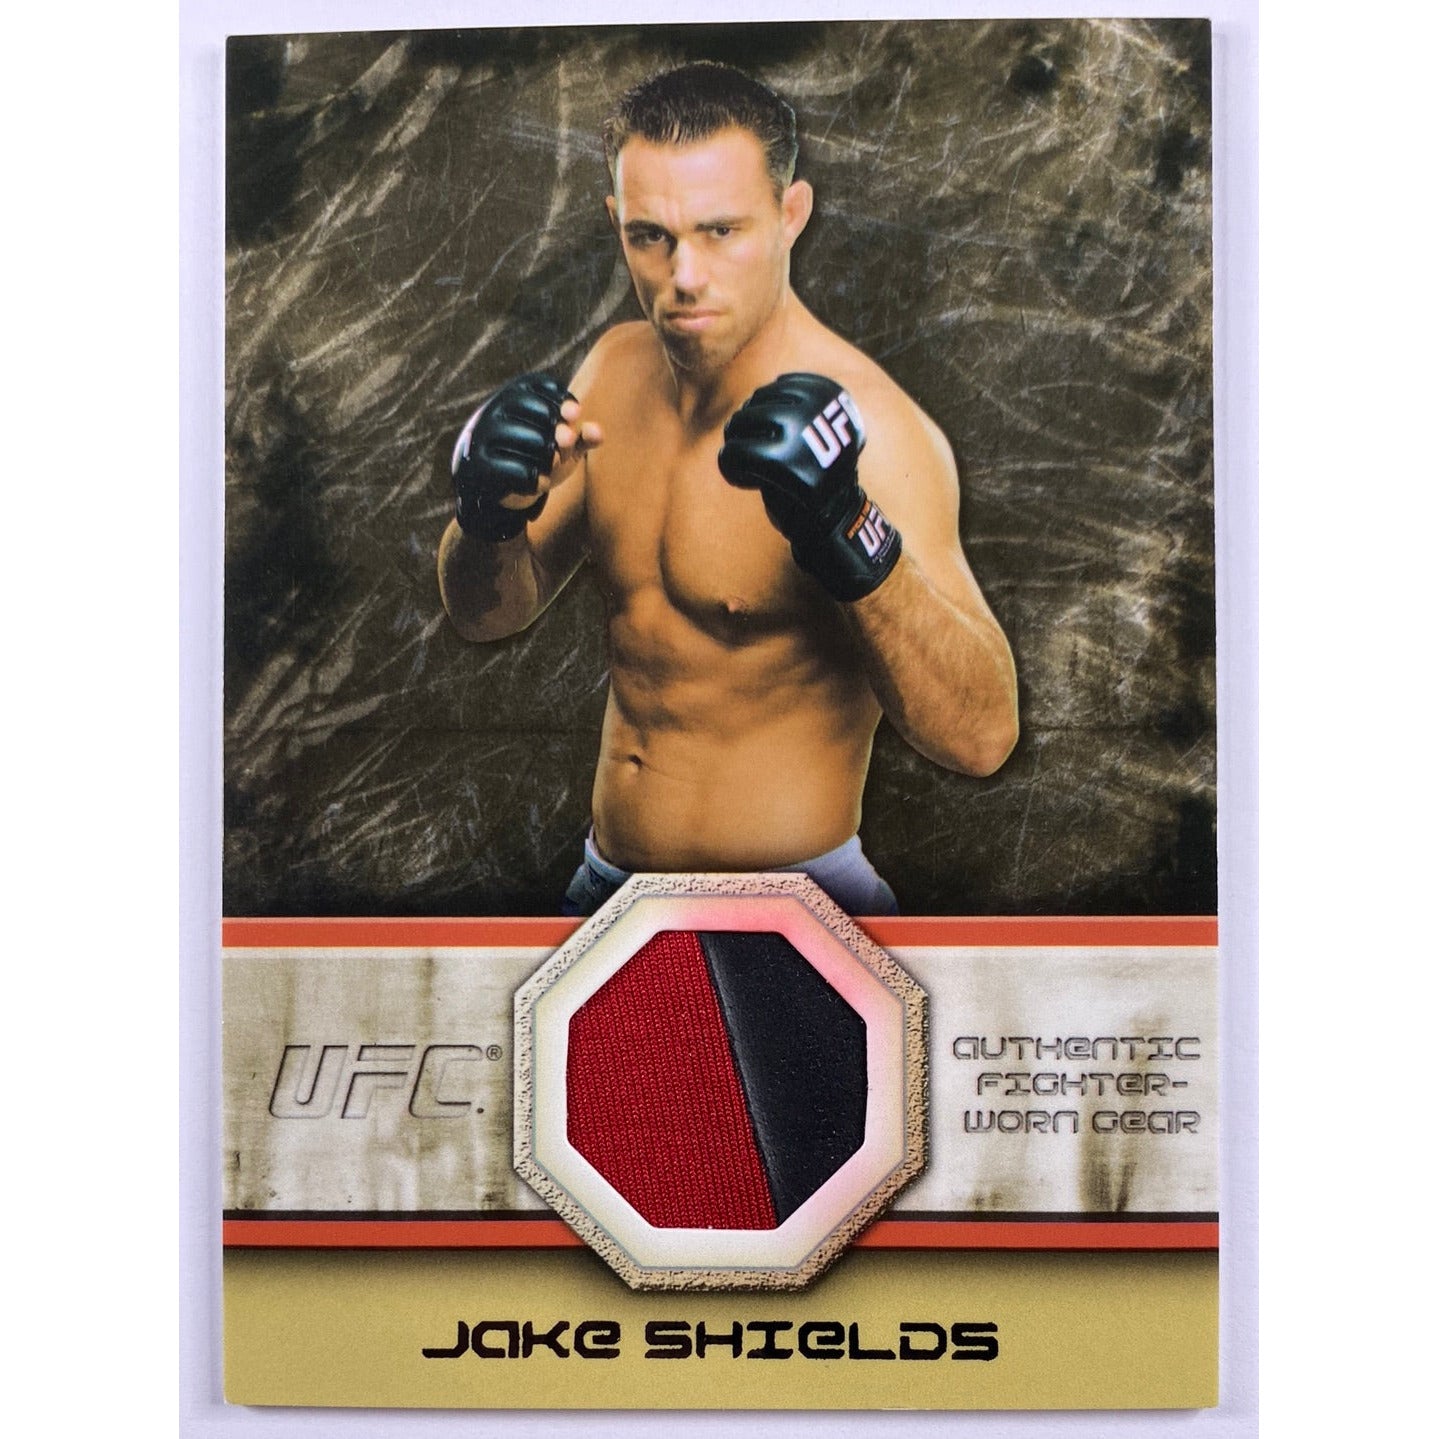 2011 Topps Moment Of Truth Jake Shields Fighter Gear Relic /88